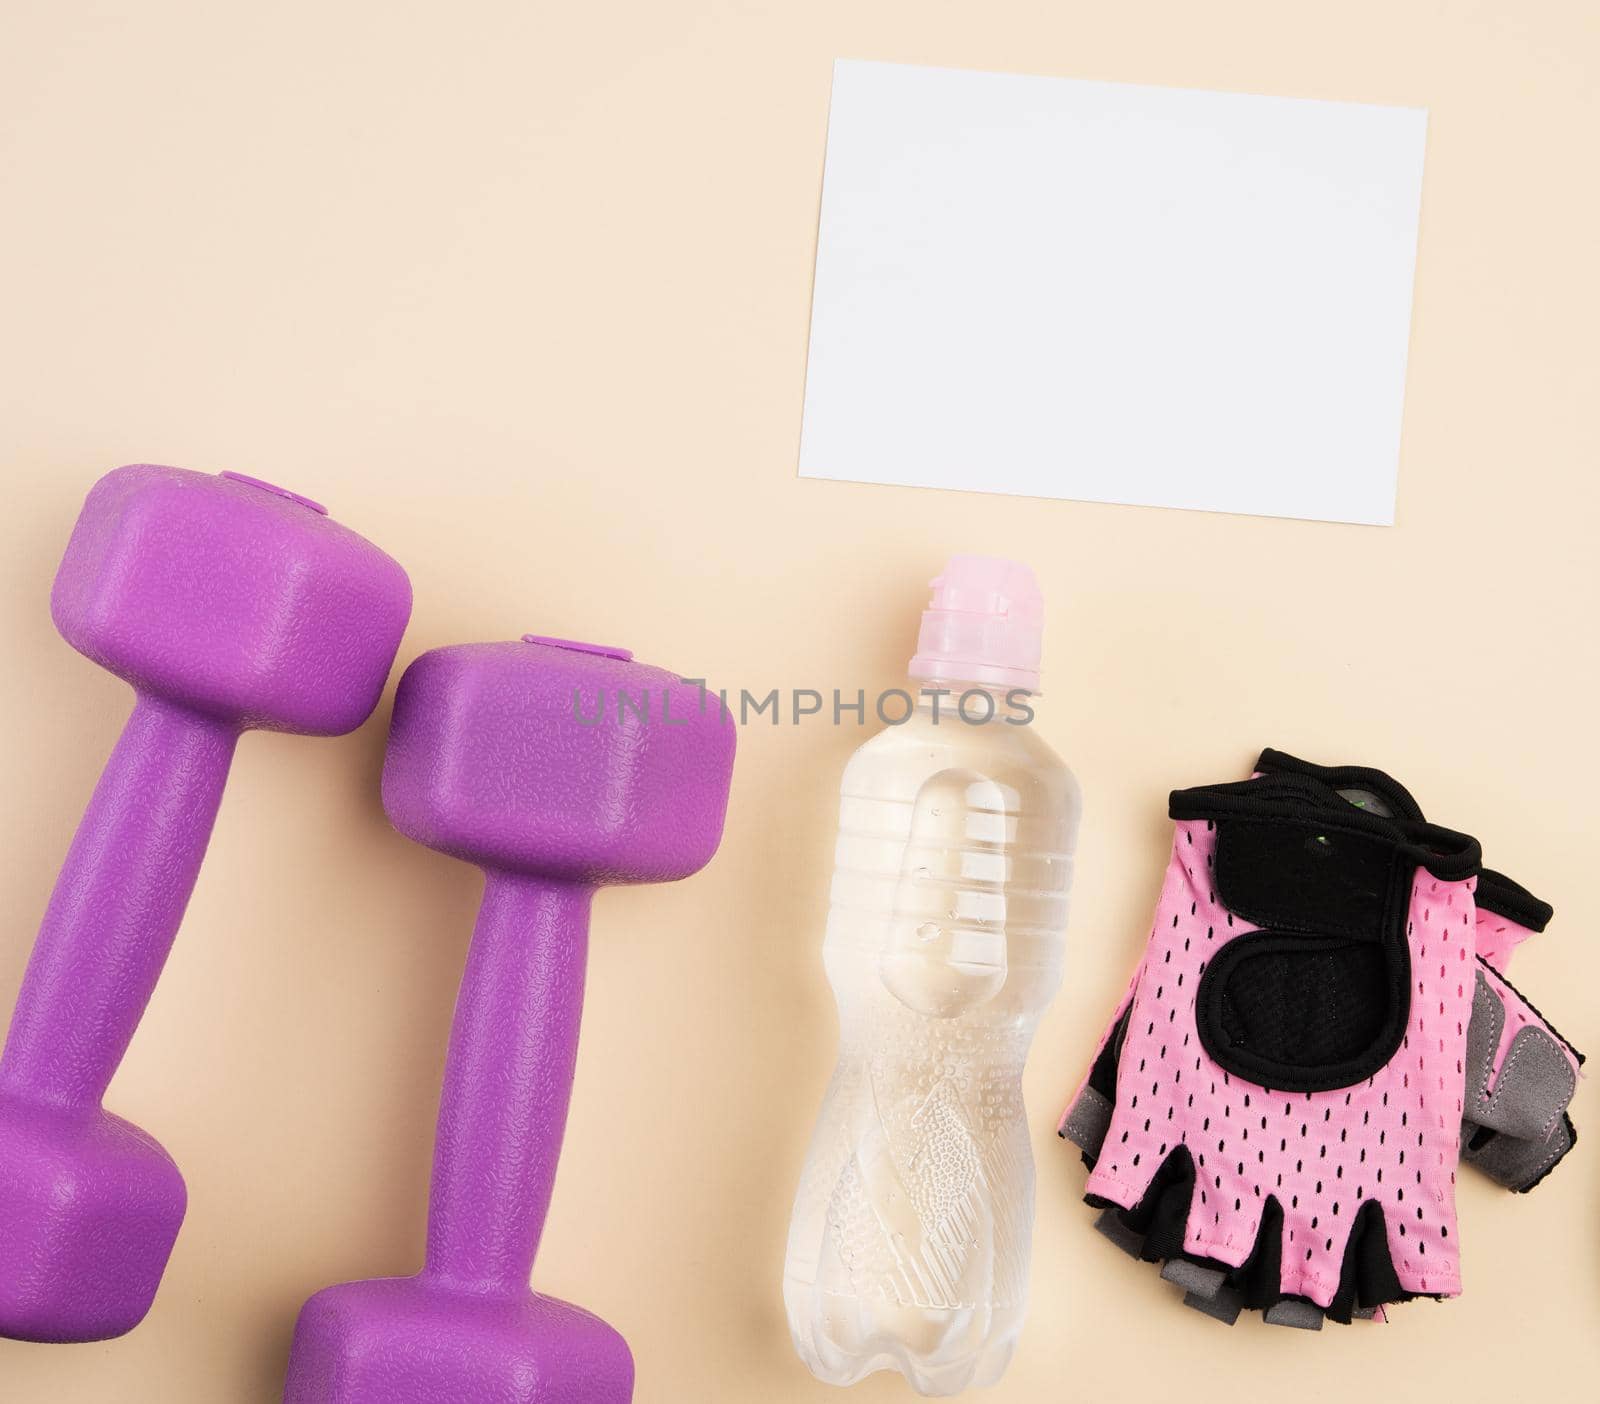 pink sports gloves, pair of purple dumbbells and and bottle of water on a beige background by ndanko